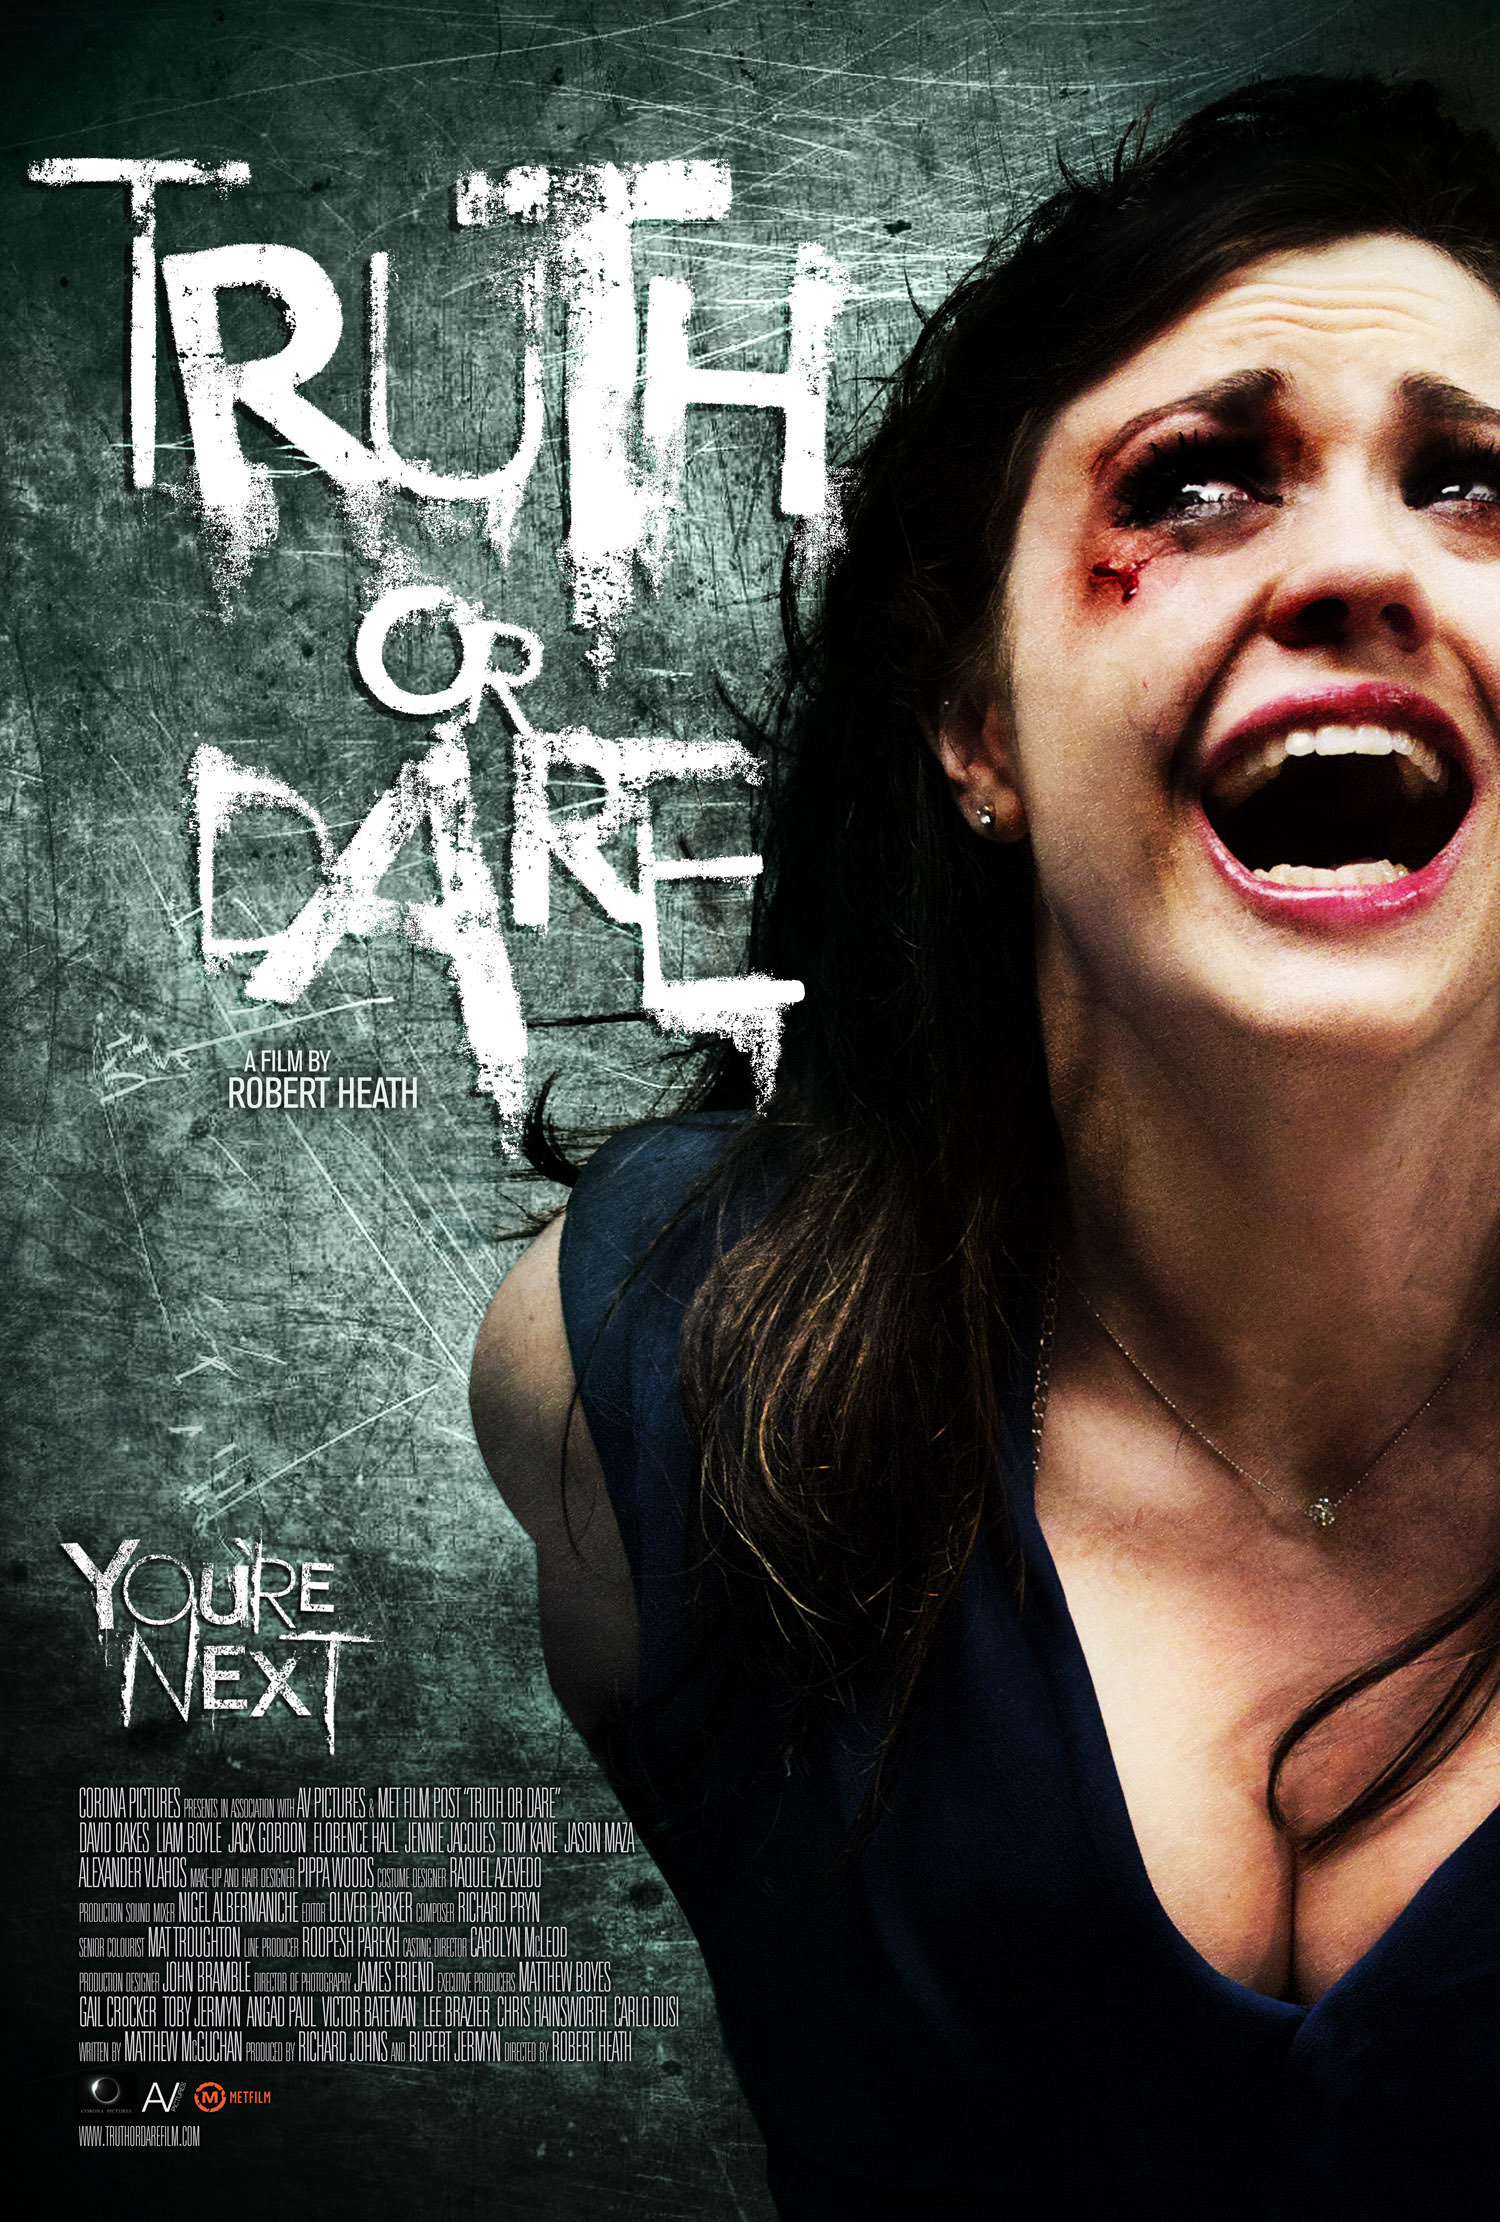 adrianna michelle recommends turth or dare pictures pic